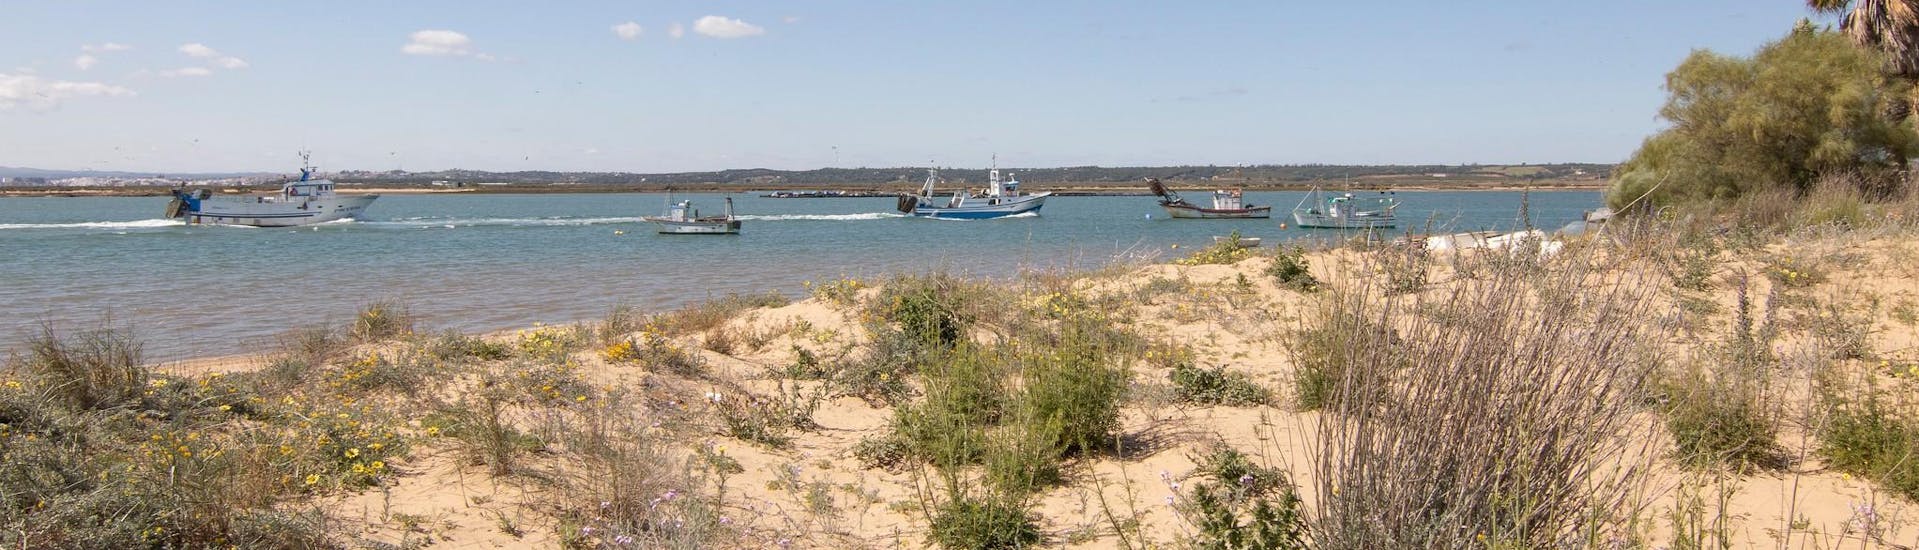 Fishing boats in front of the beach of Isla Cristina, a wonderful location that you can discover with a boat trip.